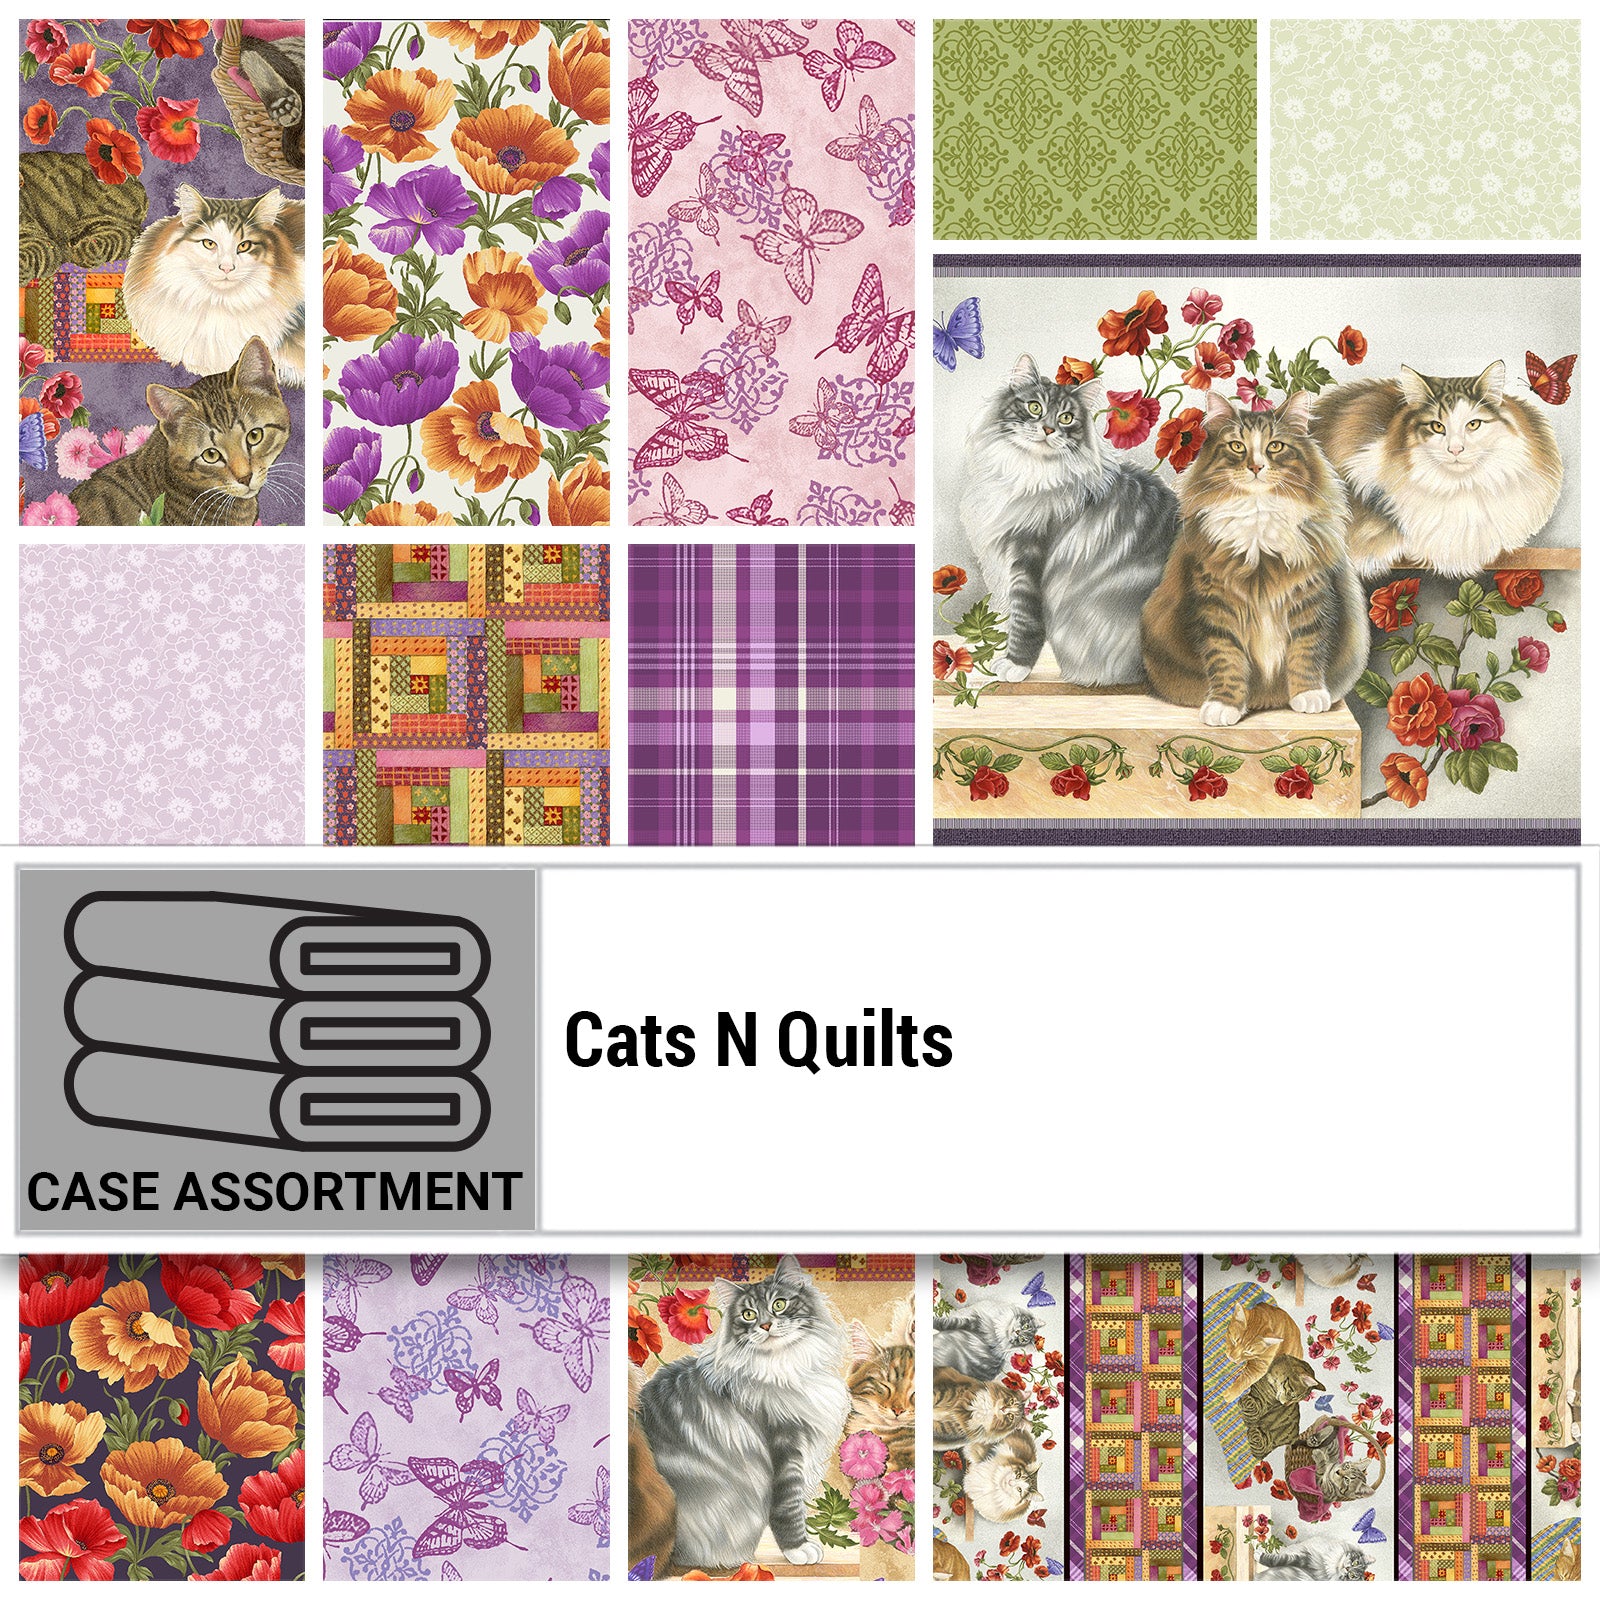 Cats N Quilts - Alover Beige Multi - Licence To Quilt